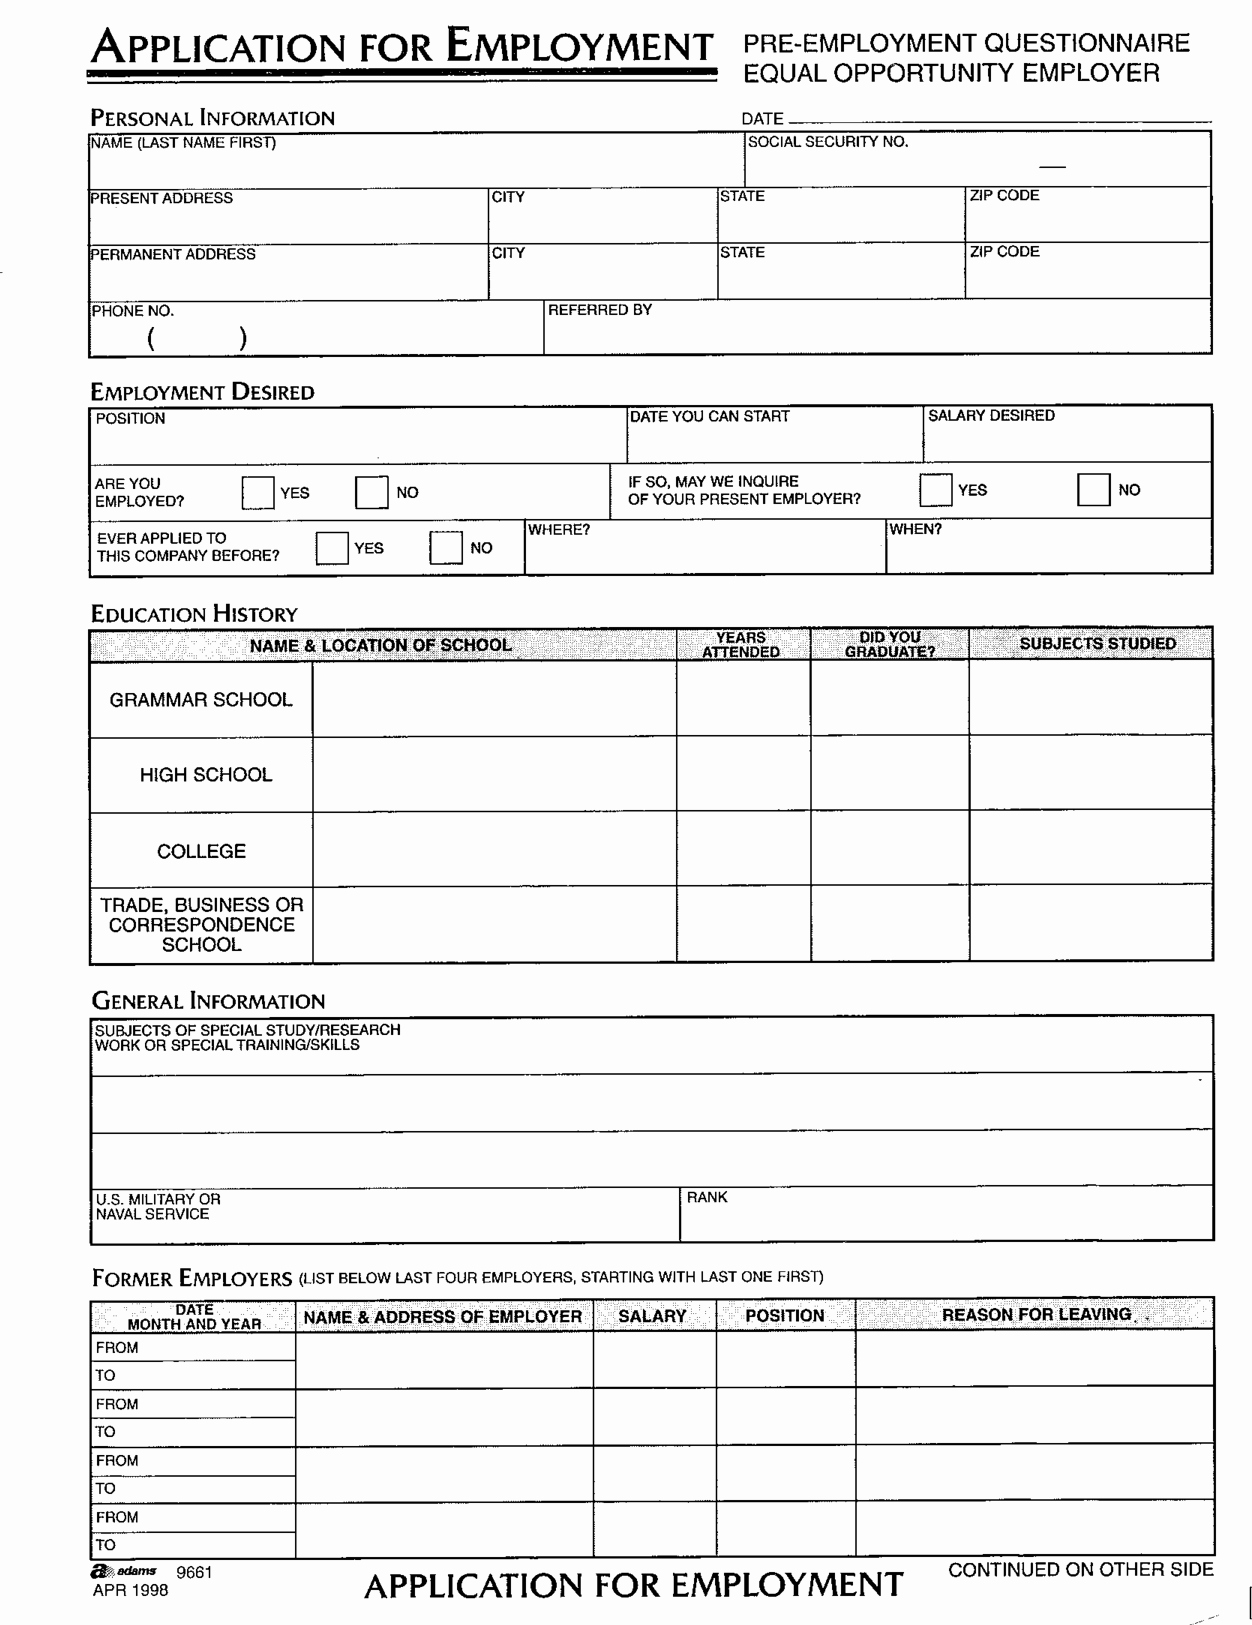 Jobs Application form Pdf Lovely Application for Employment Pdf Employment Pany